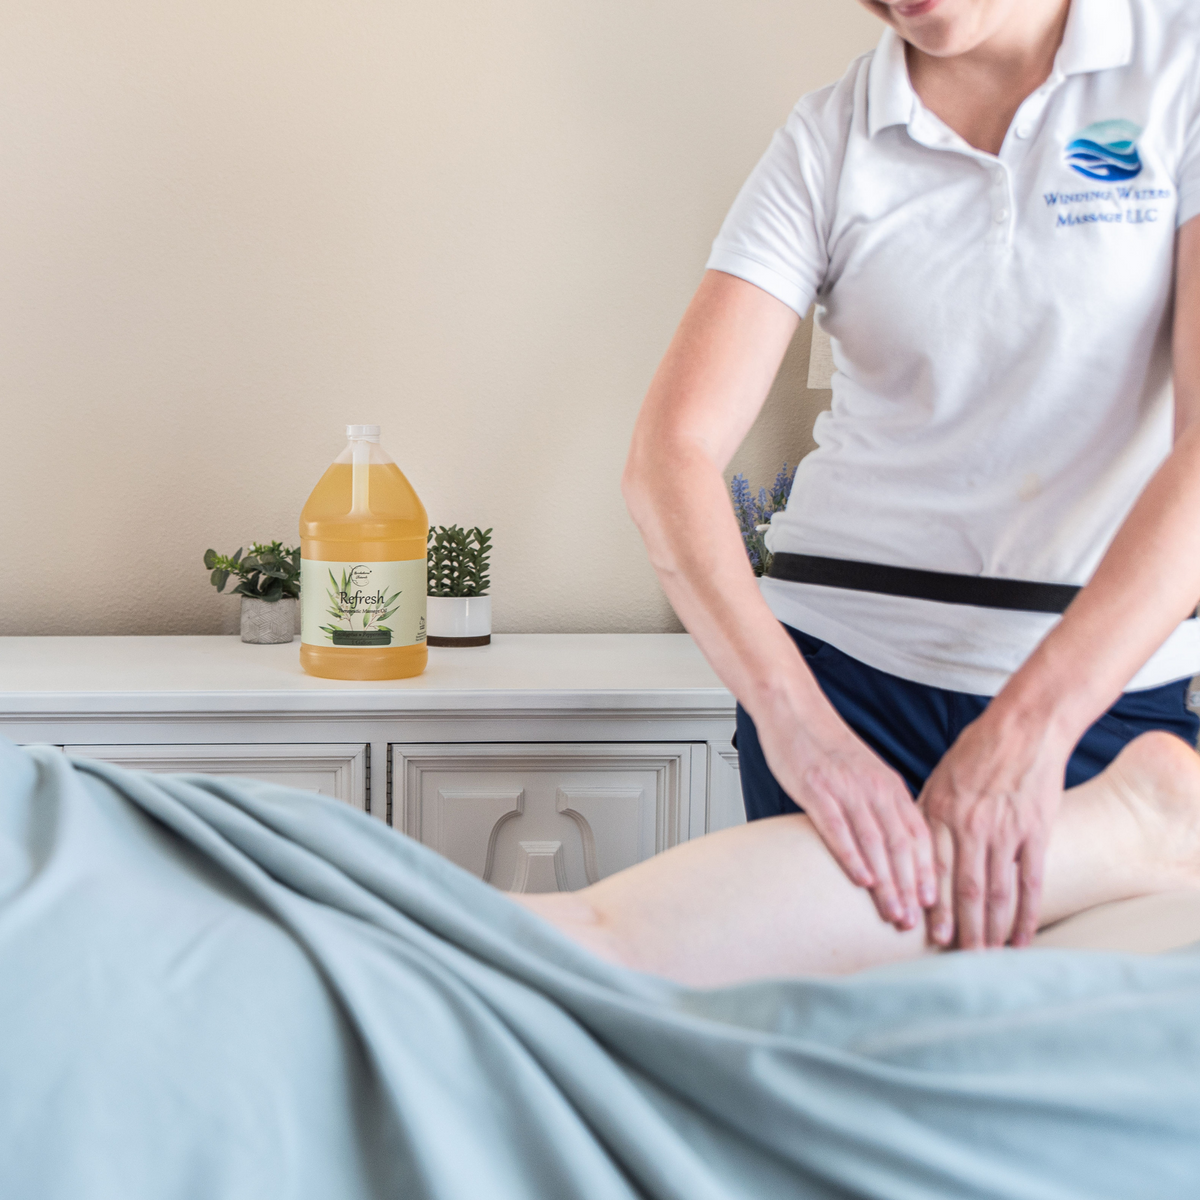 Person receiving a professional massage with Refresh Massage Oil, gallon jug is showcased in the background